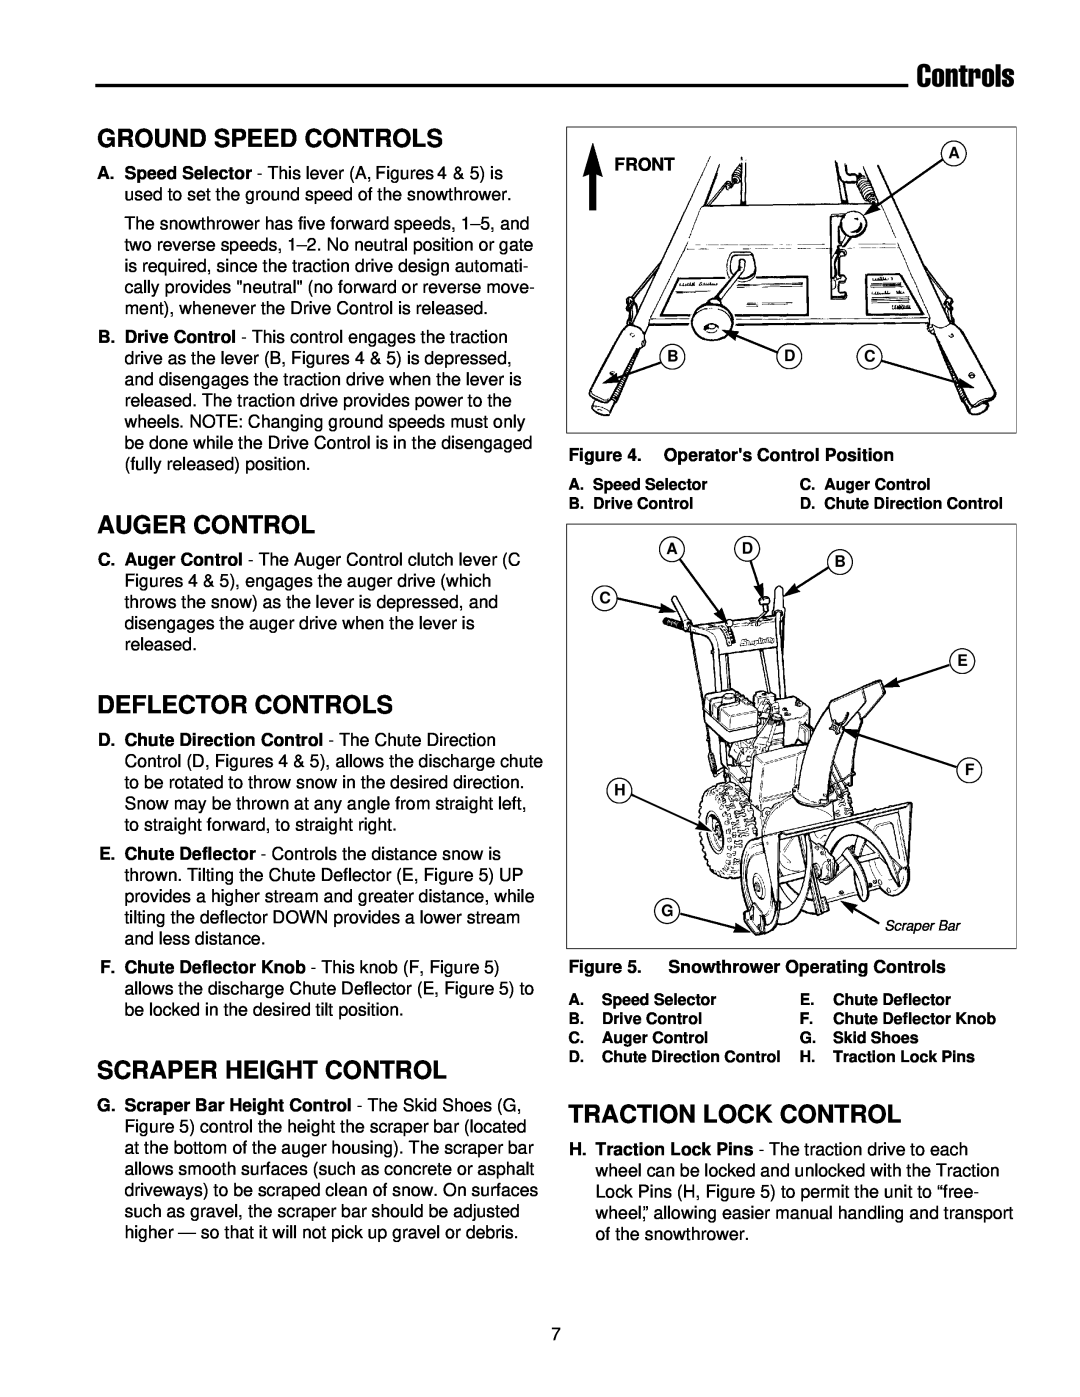 Simplicity 1693163 555M manual Ground Speed Controls, Auger Control, Deflector Controls, Scraper Height Control, Front 